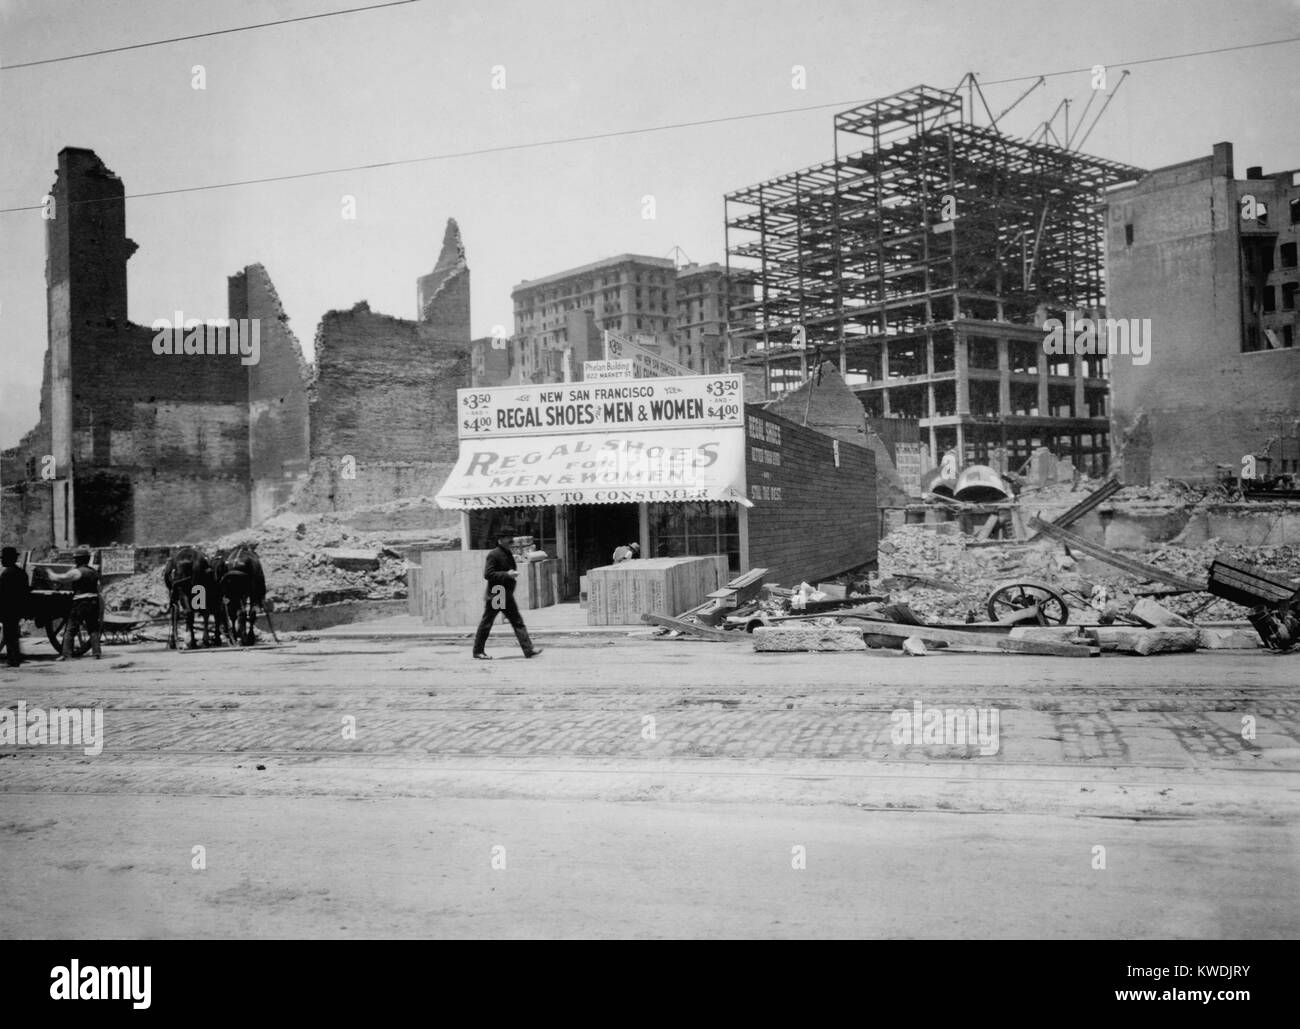 A new shoe store at 822 Market St. is open for business in San Francisco in 1906. In the background a steel frame building is under construction amid the ruins from the April 18, 1906 San Francisco earthquake (BSLOC 2017 17 50) Stock Photo